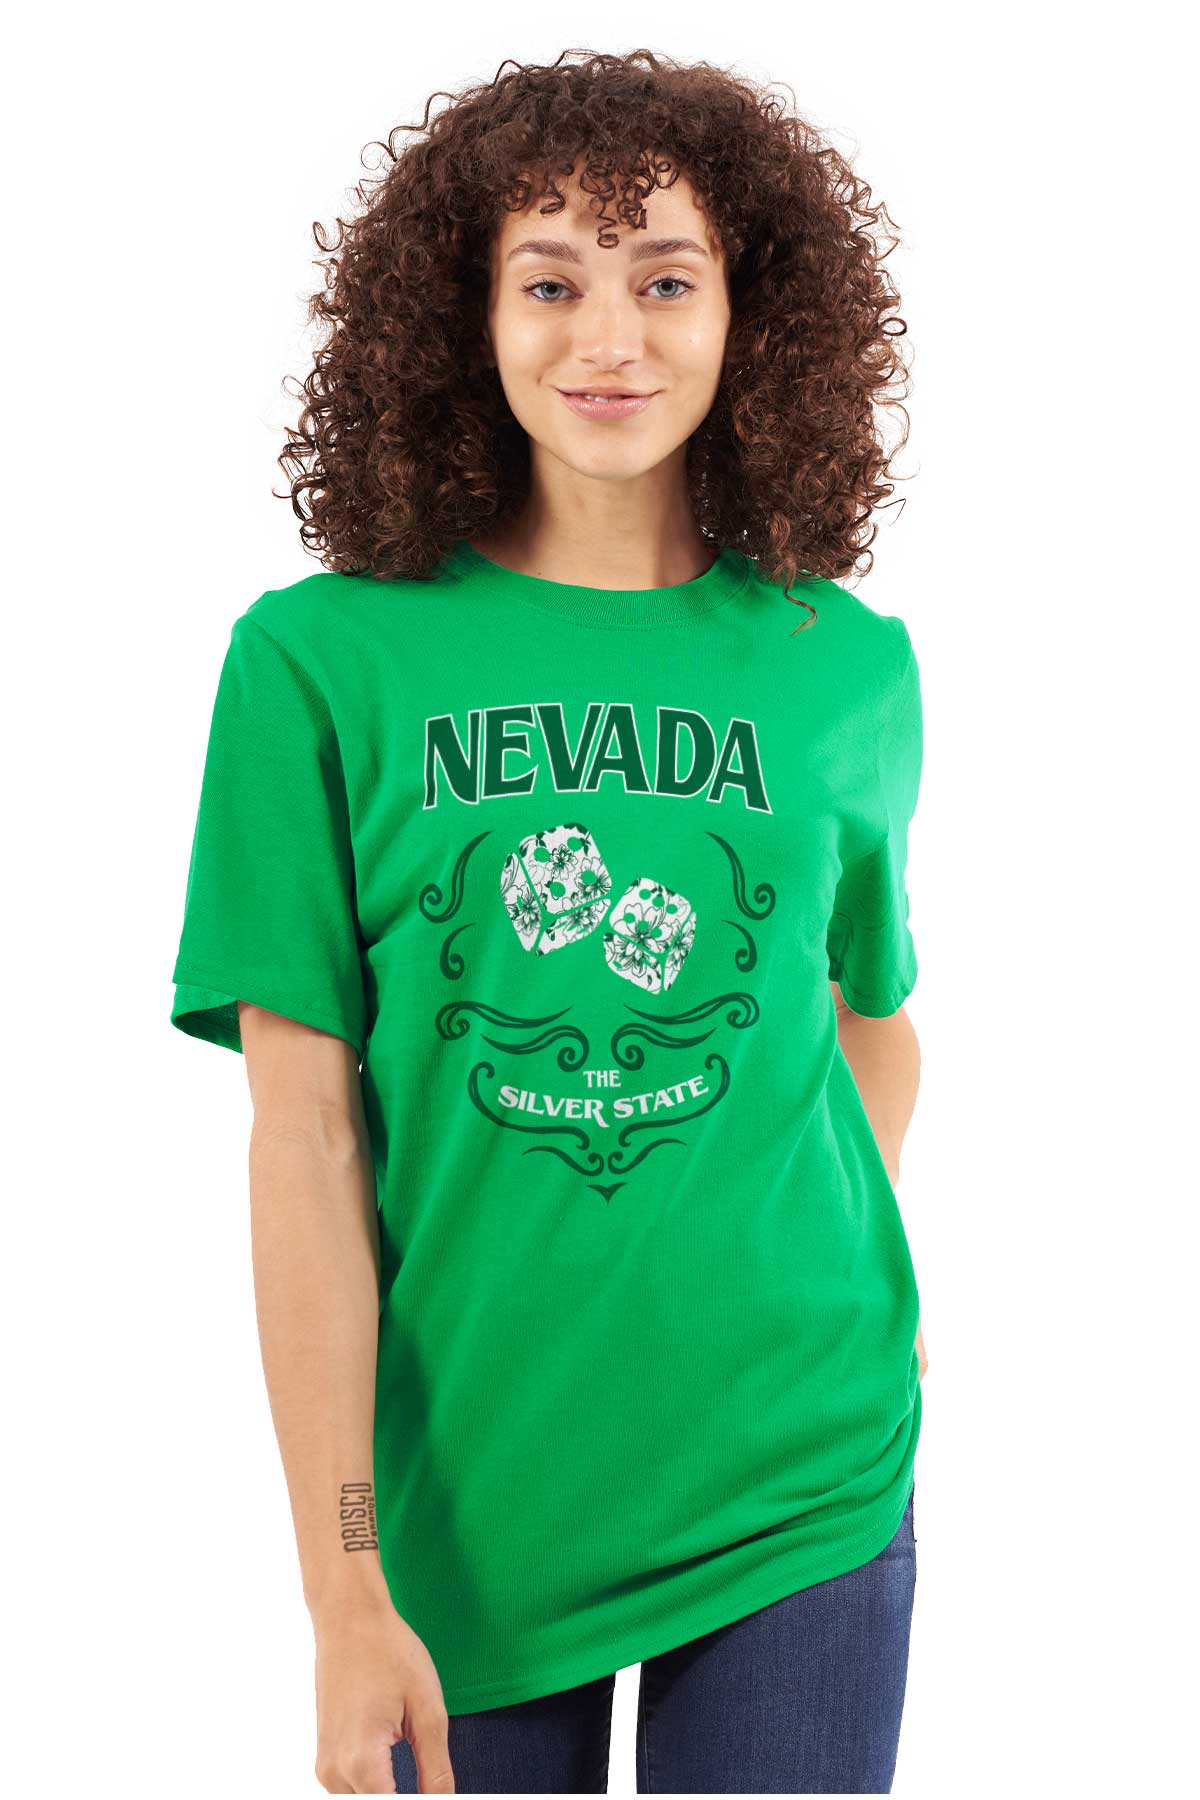 Cute Nevada Lucky Dice Floral NV Women's Graphic T Shirt Tees Brisco Brands 3X - image 1 of 6